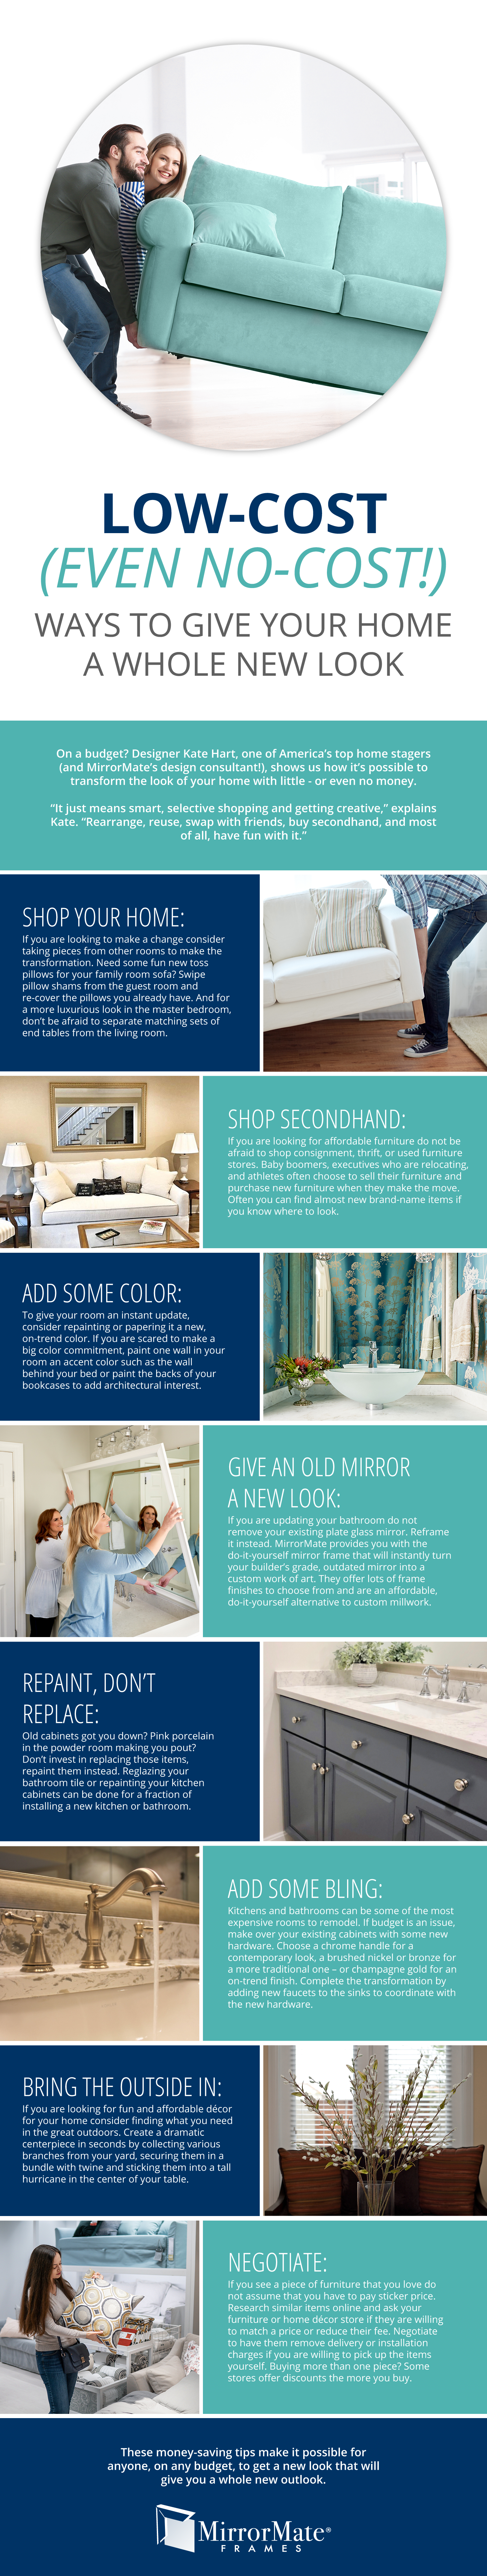 Low-Cost (Even No-Cost!) Ways To Give Your Home a Whole New Look Infographic